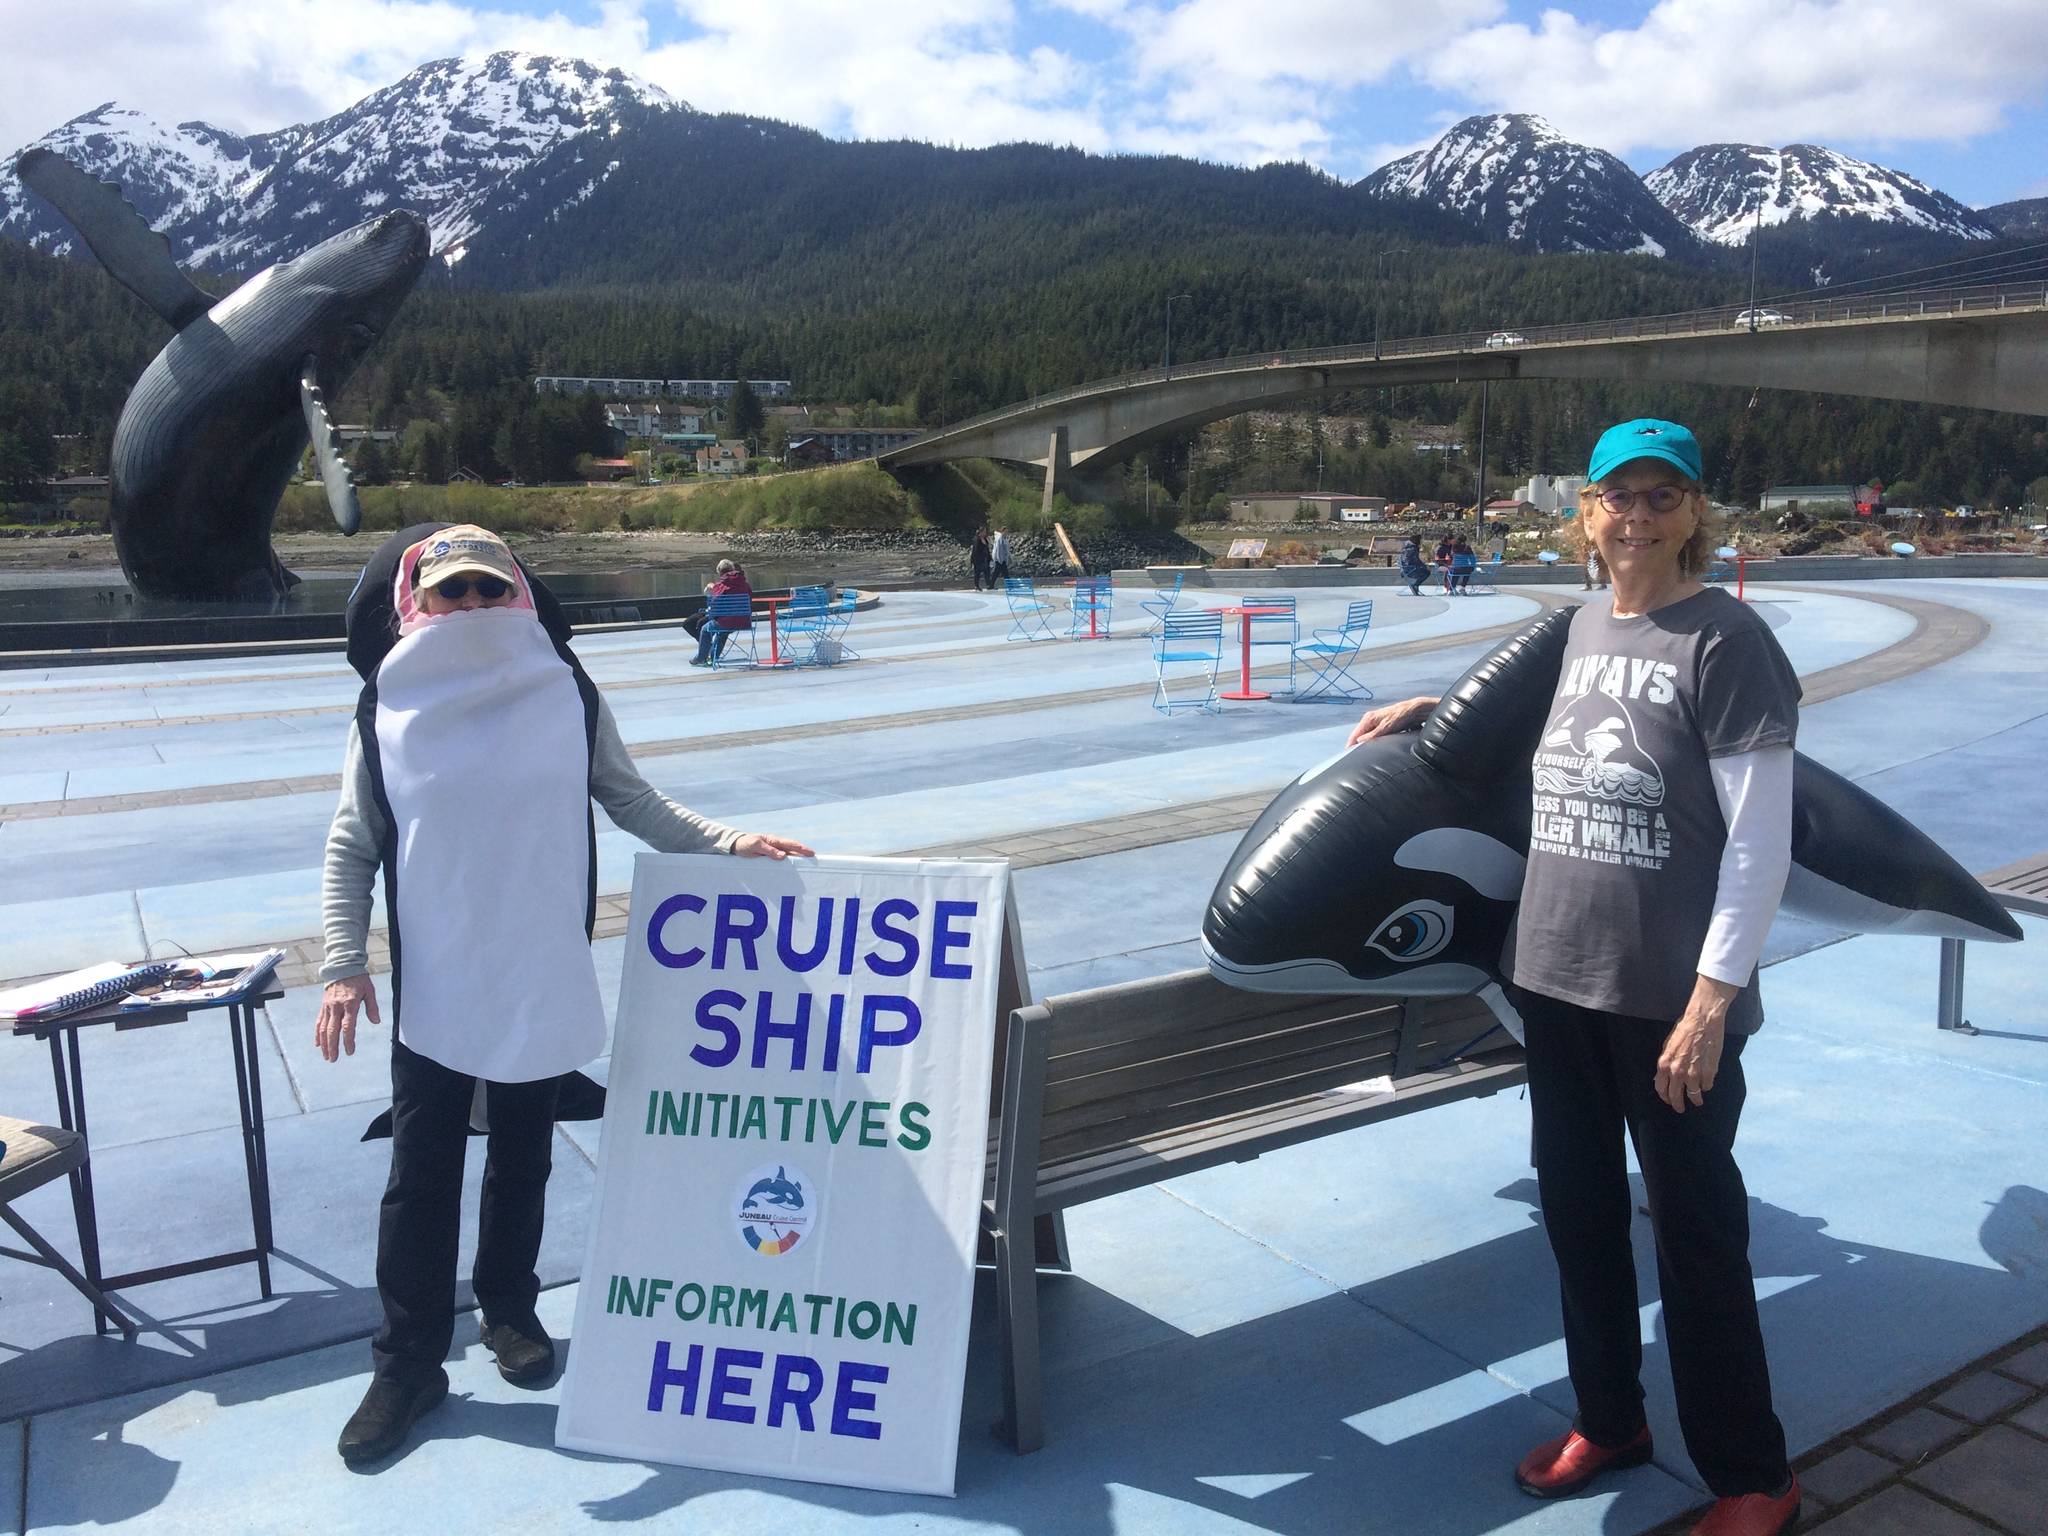 Pat White (left) and Sue Schrader (right), collect signatures to move a trio of initiatives aimed at curbing cruise ship visits to Juneau onto October's municipal ballot. The pair are members of a group called Juneau Cruise Control. With less than a week until the June 4 deadline to submit signatures for each question, organizers are not releasing the number of signatories to date. (Courtesy photo/Sue Schrader)